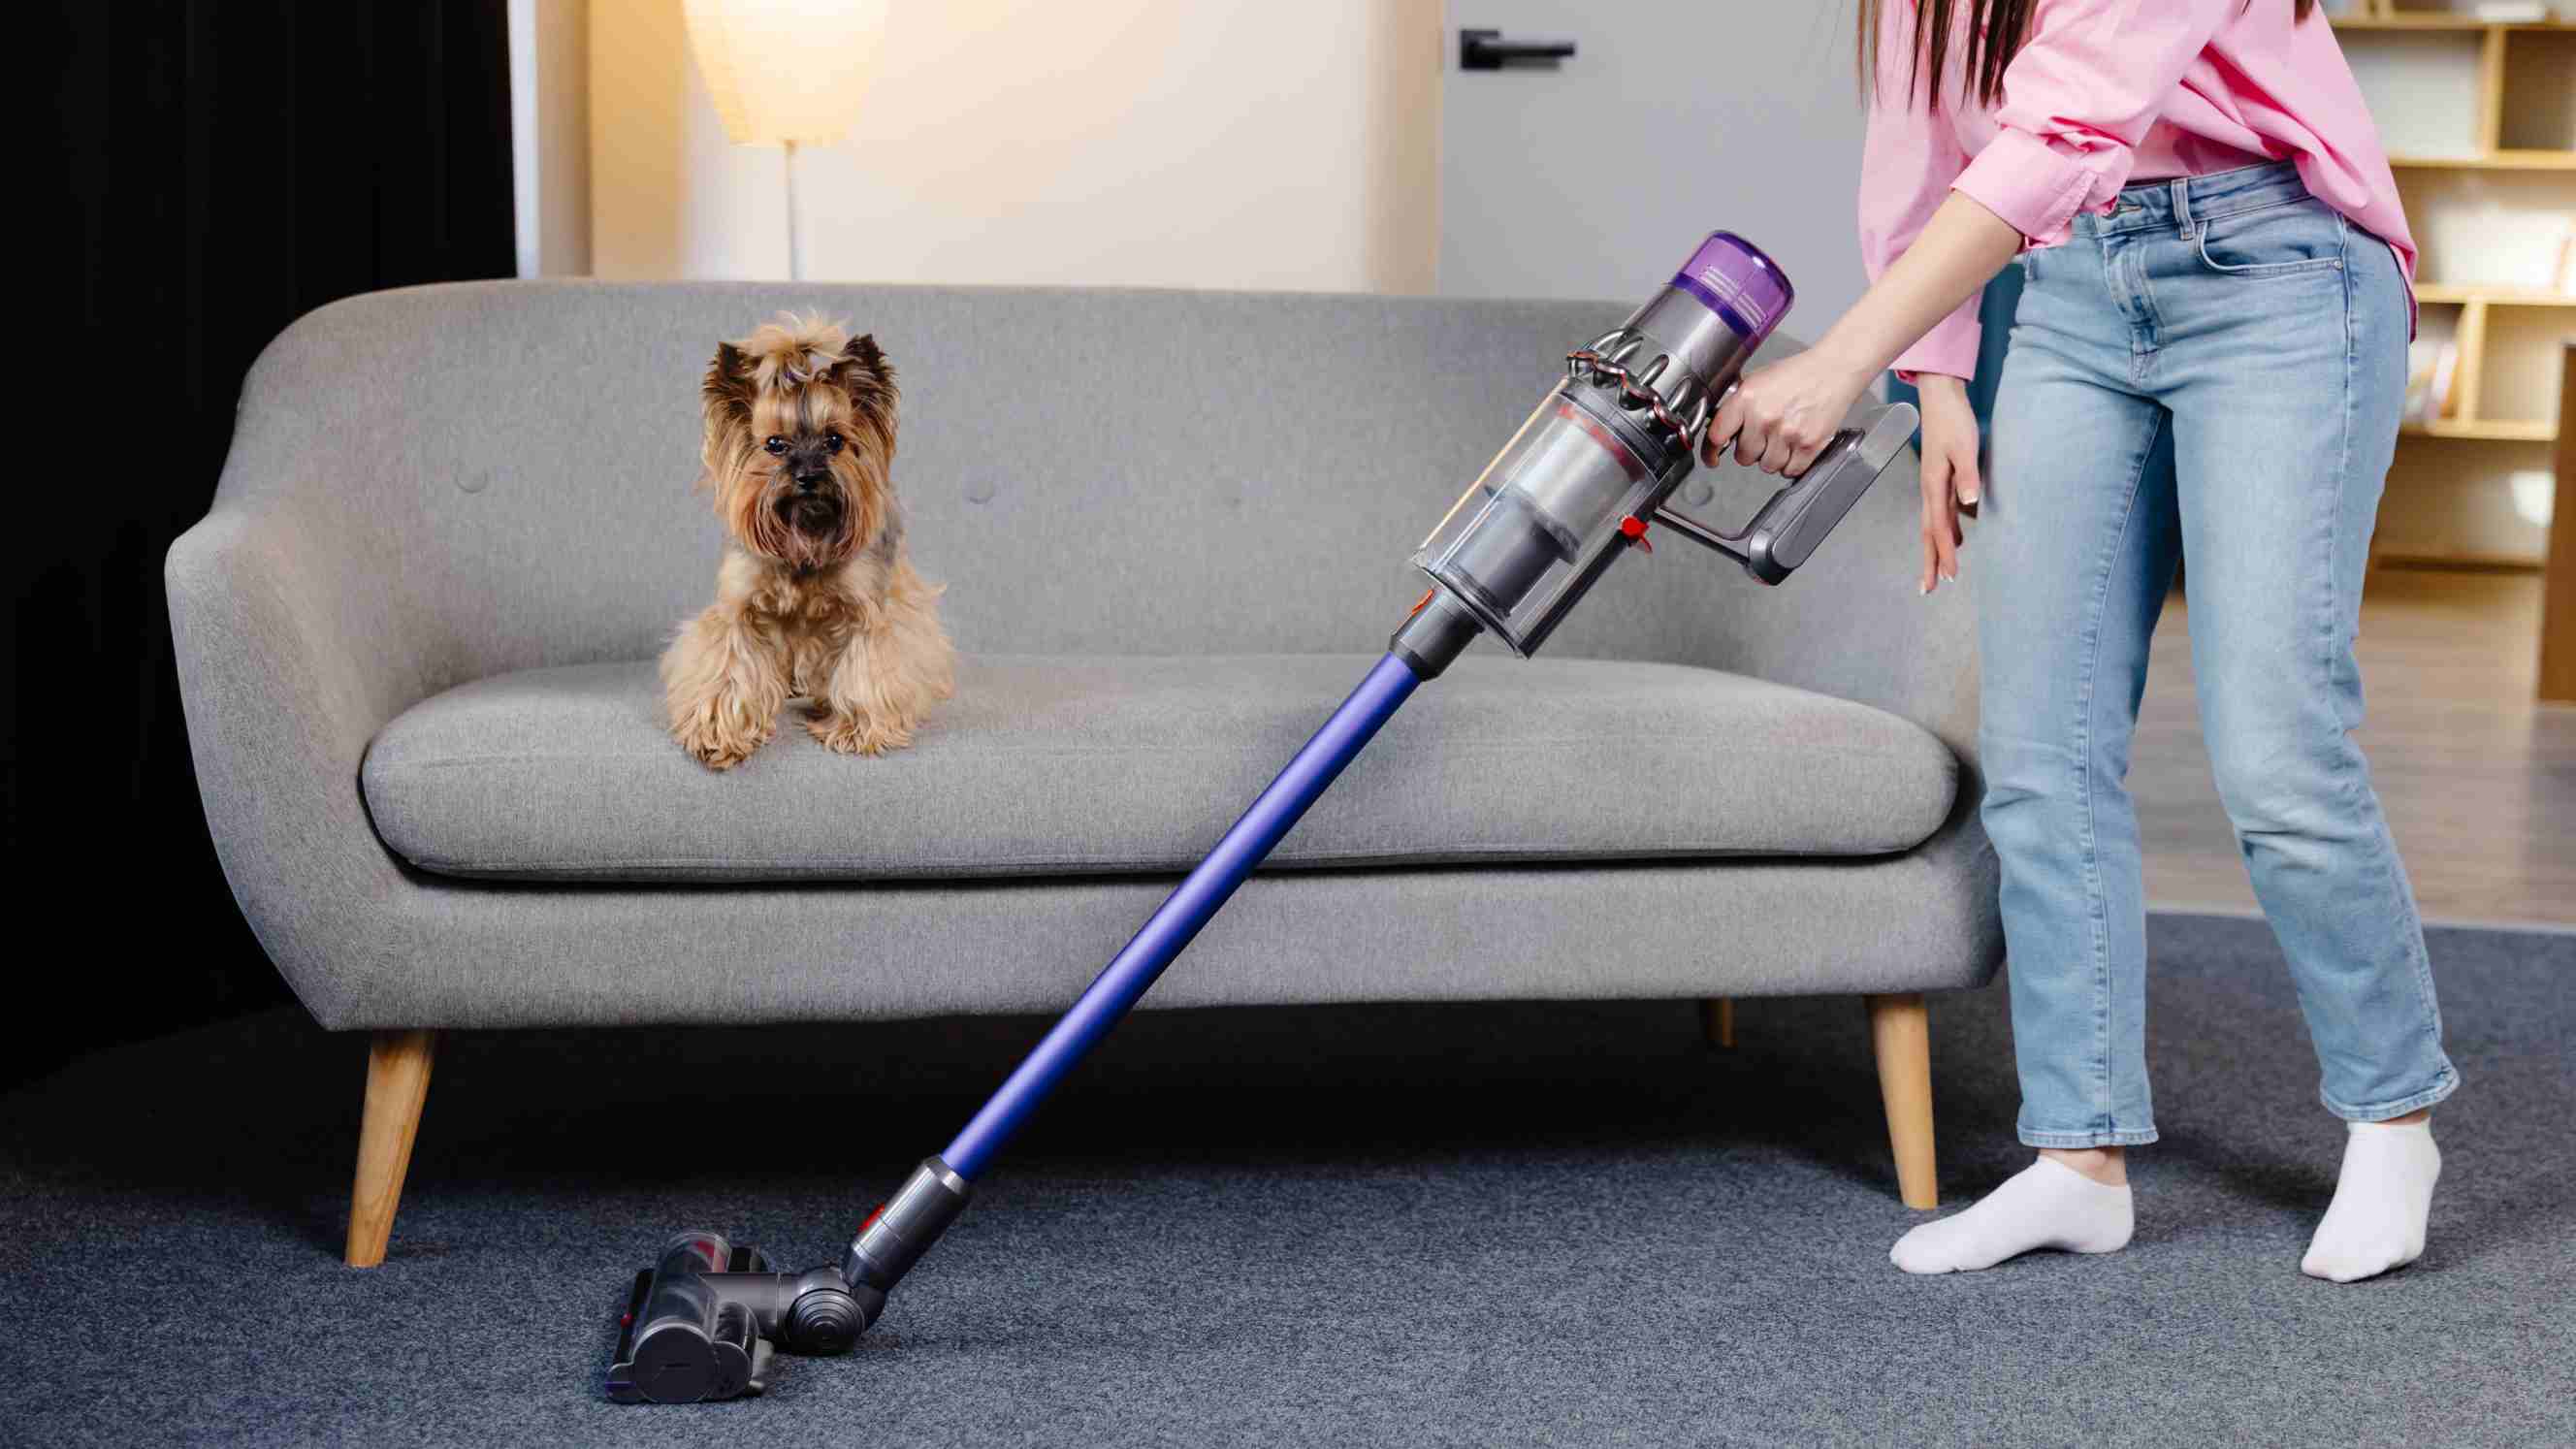 Bagged vs bagless vacuum - A woman vacuuming at home with a bagged vacuum cleaner while her cute dog watches